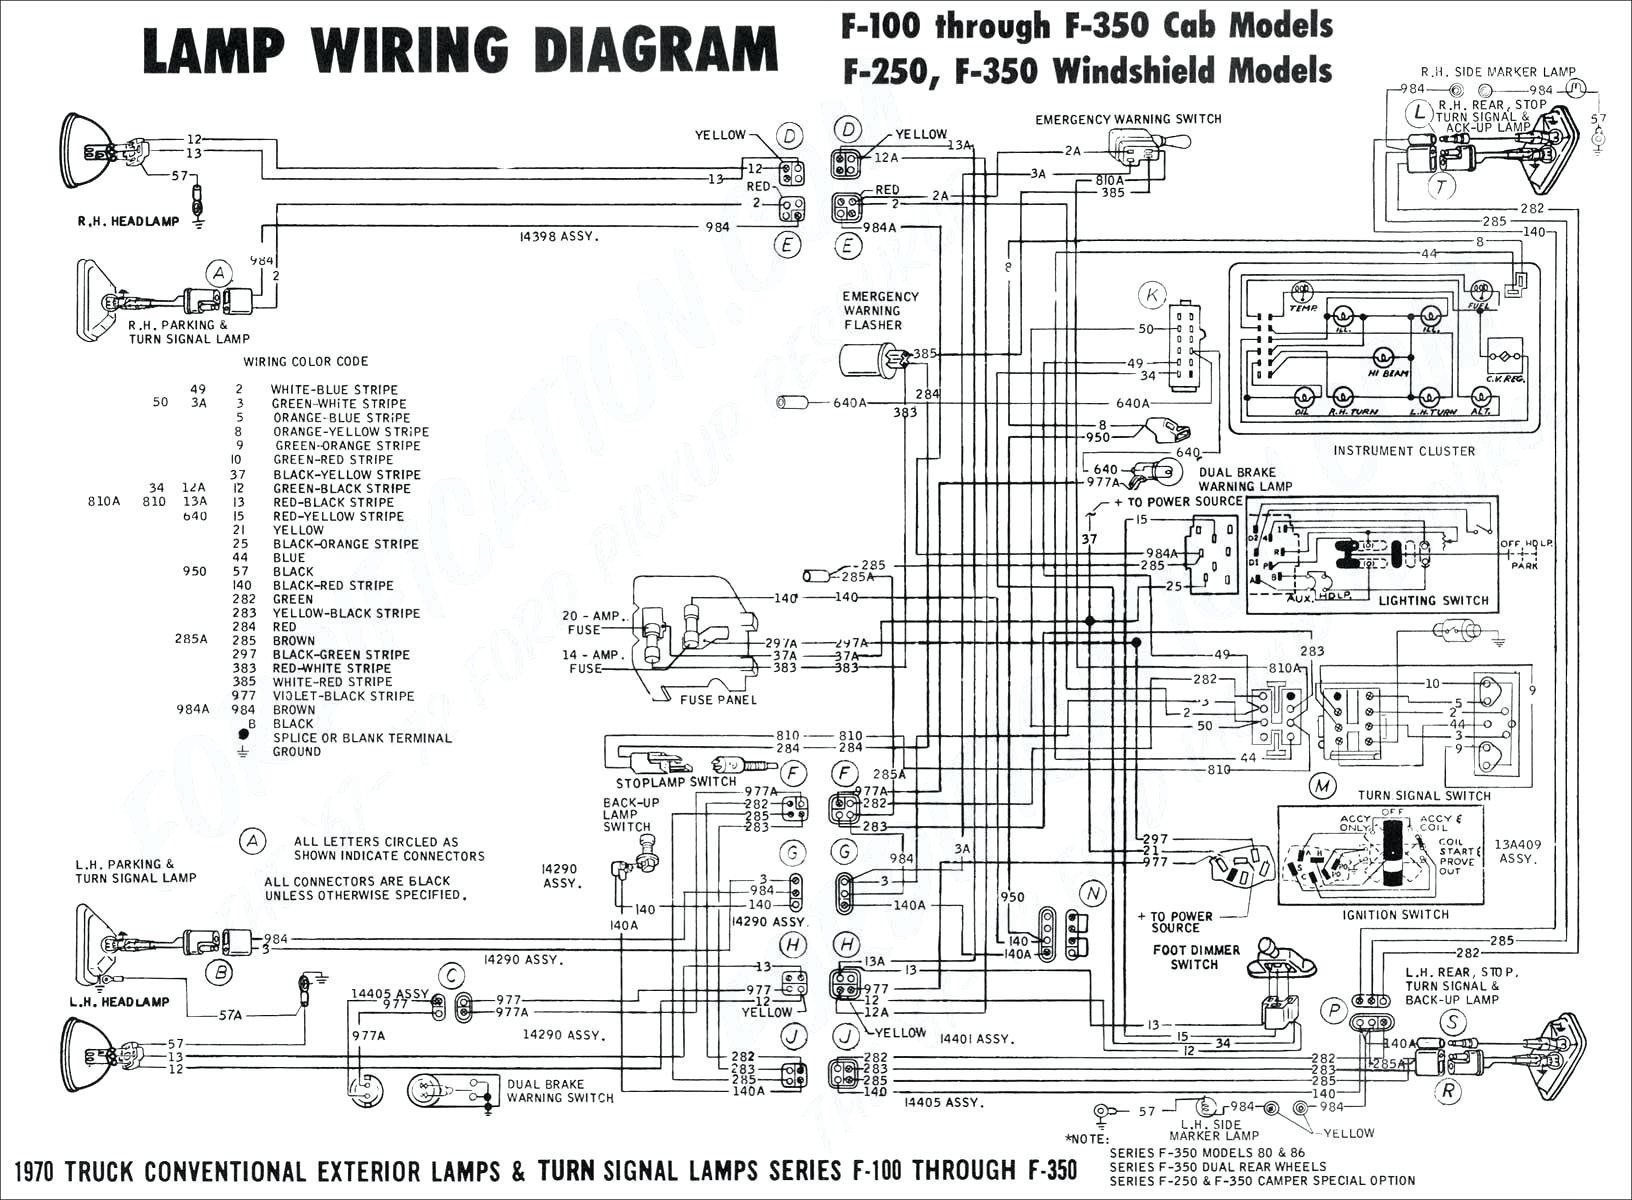 Wiring Diagram for Universal Ignition Switch Valid Wiring Diagram for Universal Turn Signal Switch Valid Wiring